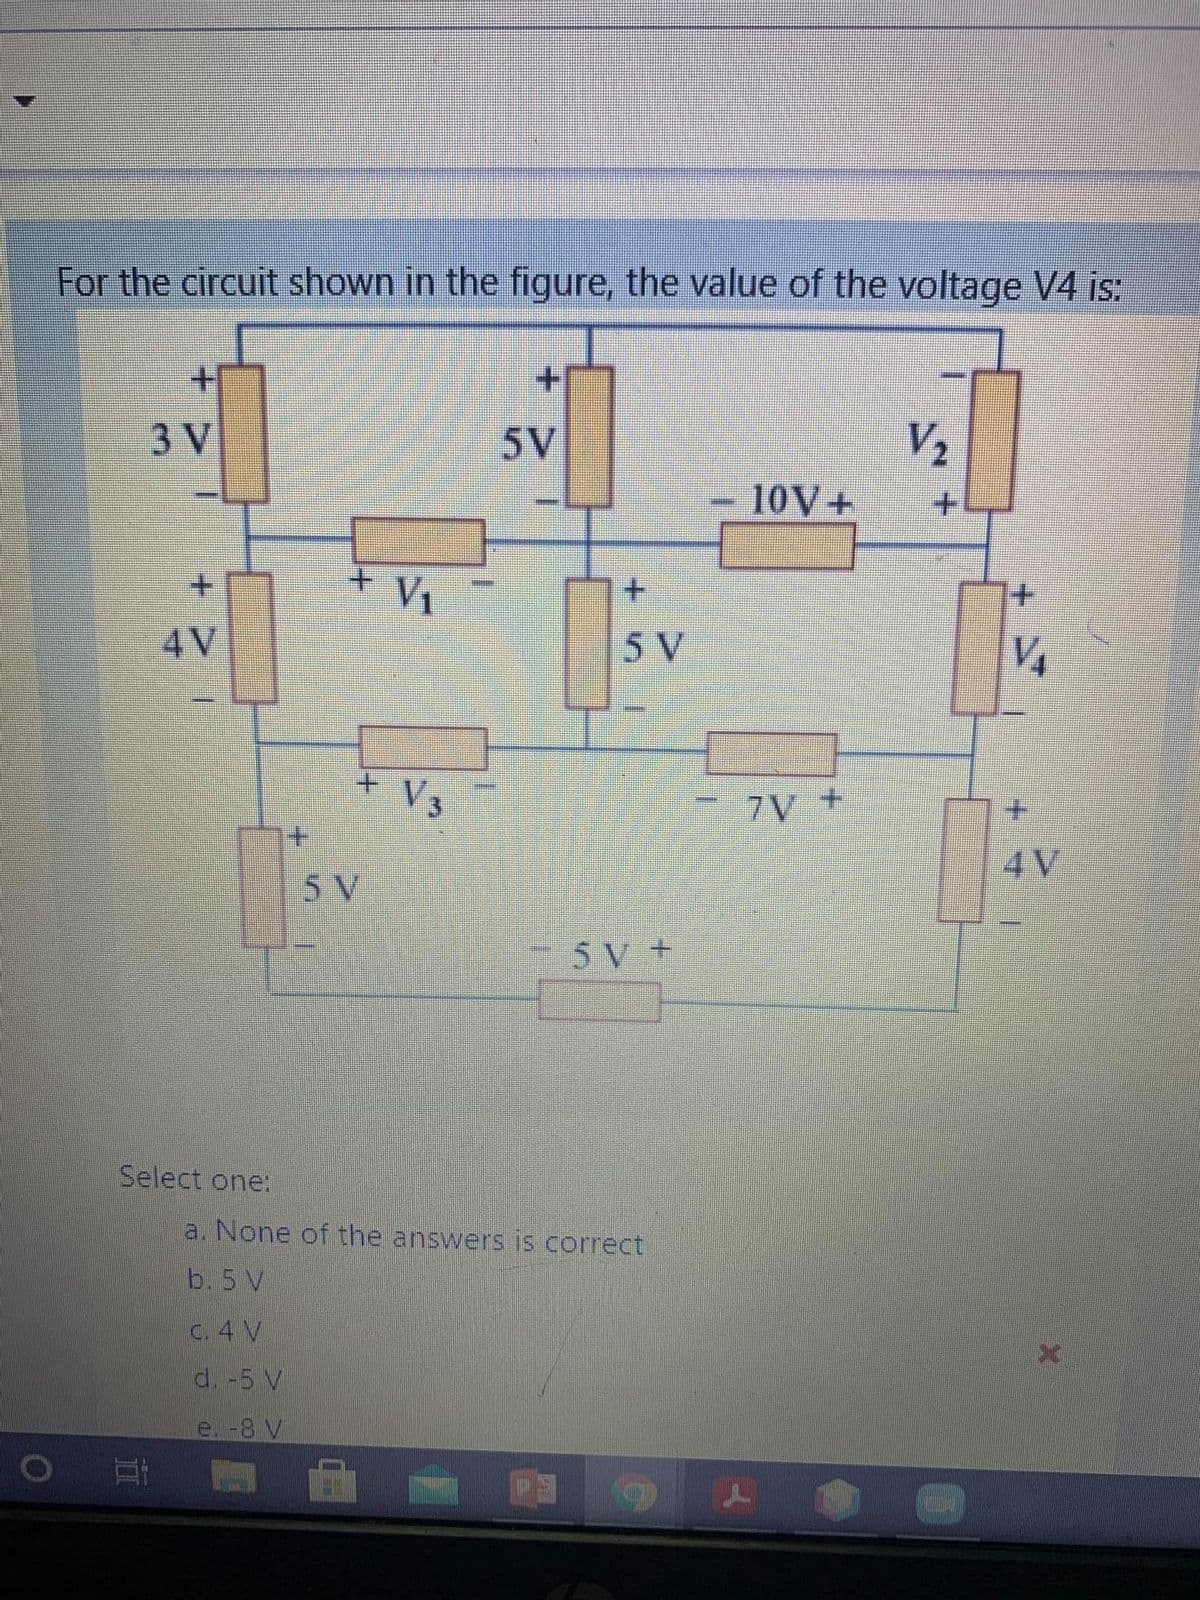 For the circuit shown in the figure, the value of the voltage V4 is:
+1
V2
10V+
3 V
5V
+.
V1
+.
4V
5 V
7V +
4V
5 V
+ AS
Select one:
a. None of the answers js correct
b.5 V
C. 4 V
d. -5 V
e.-8 V
+.
